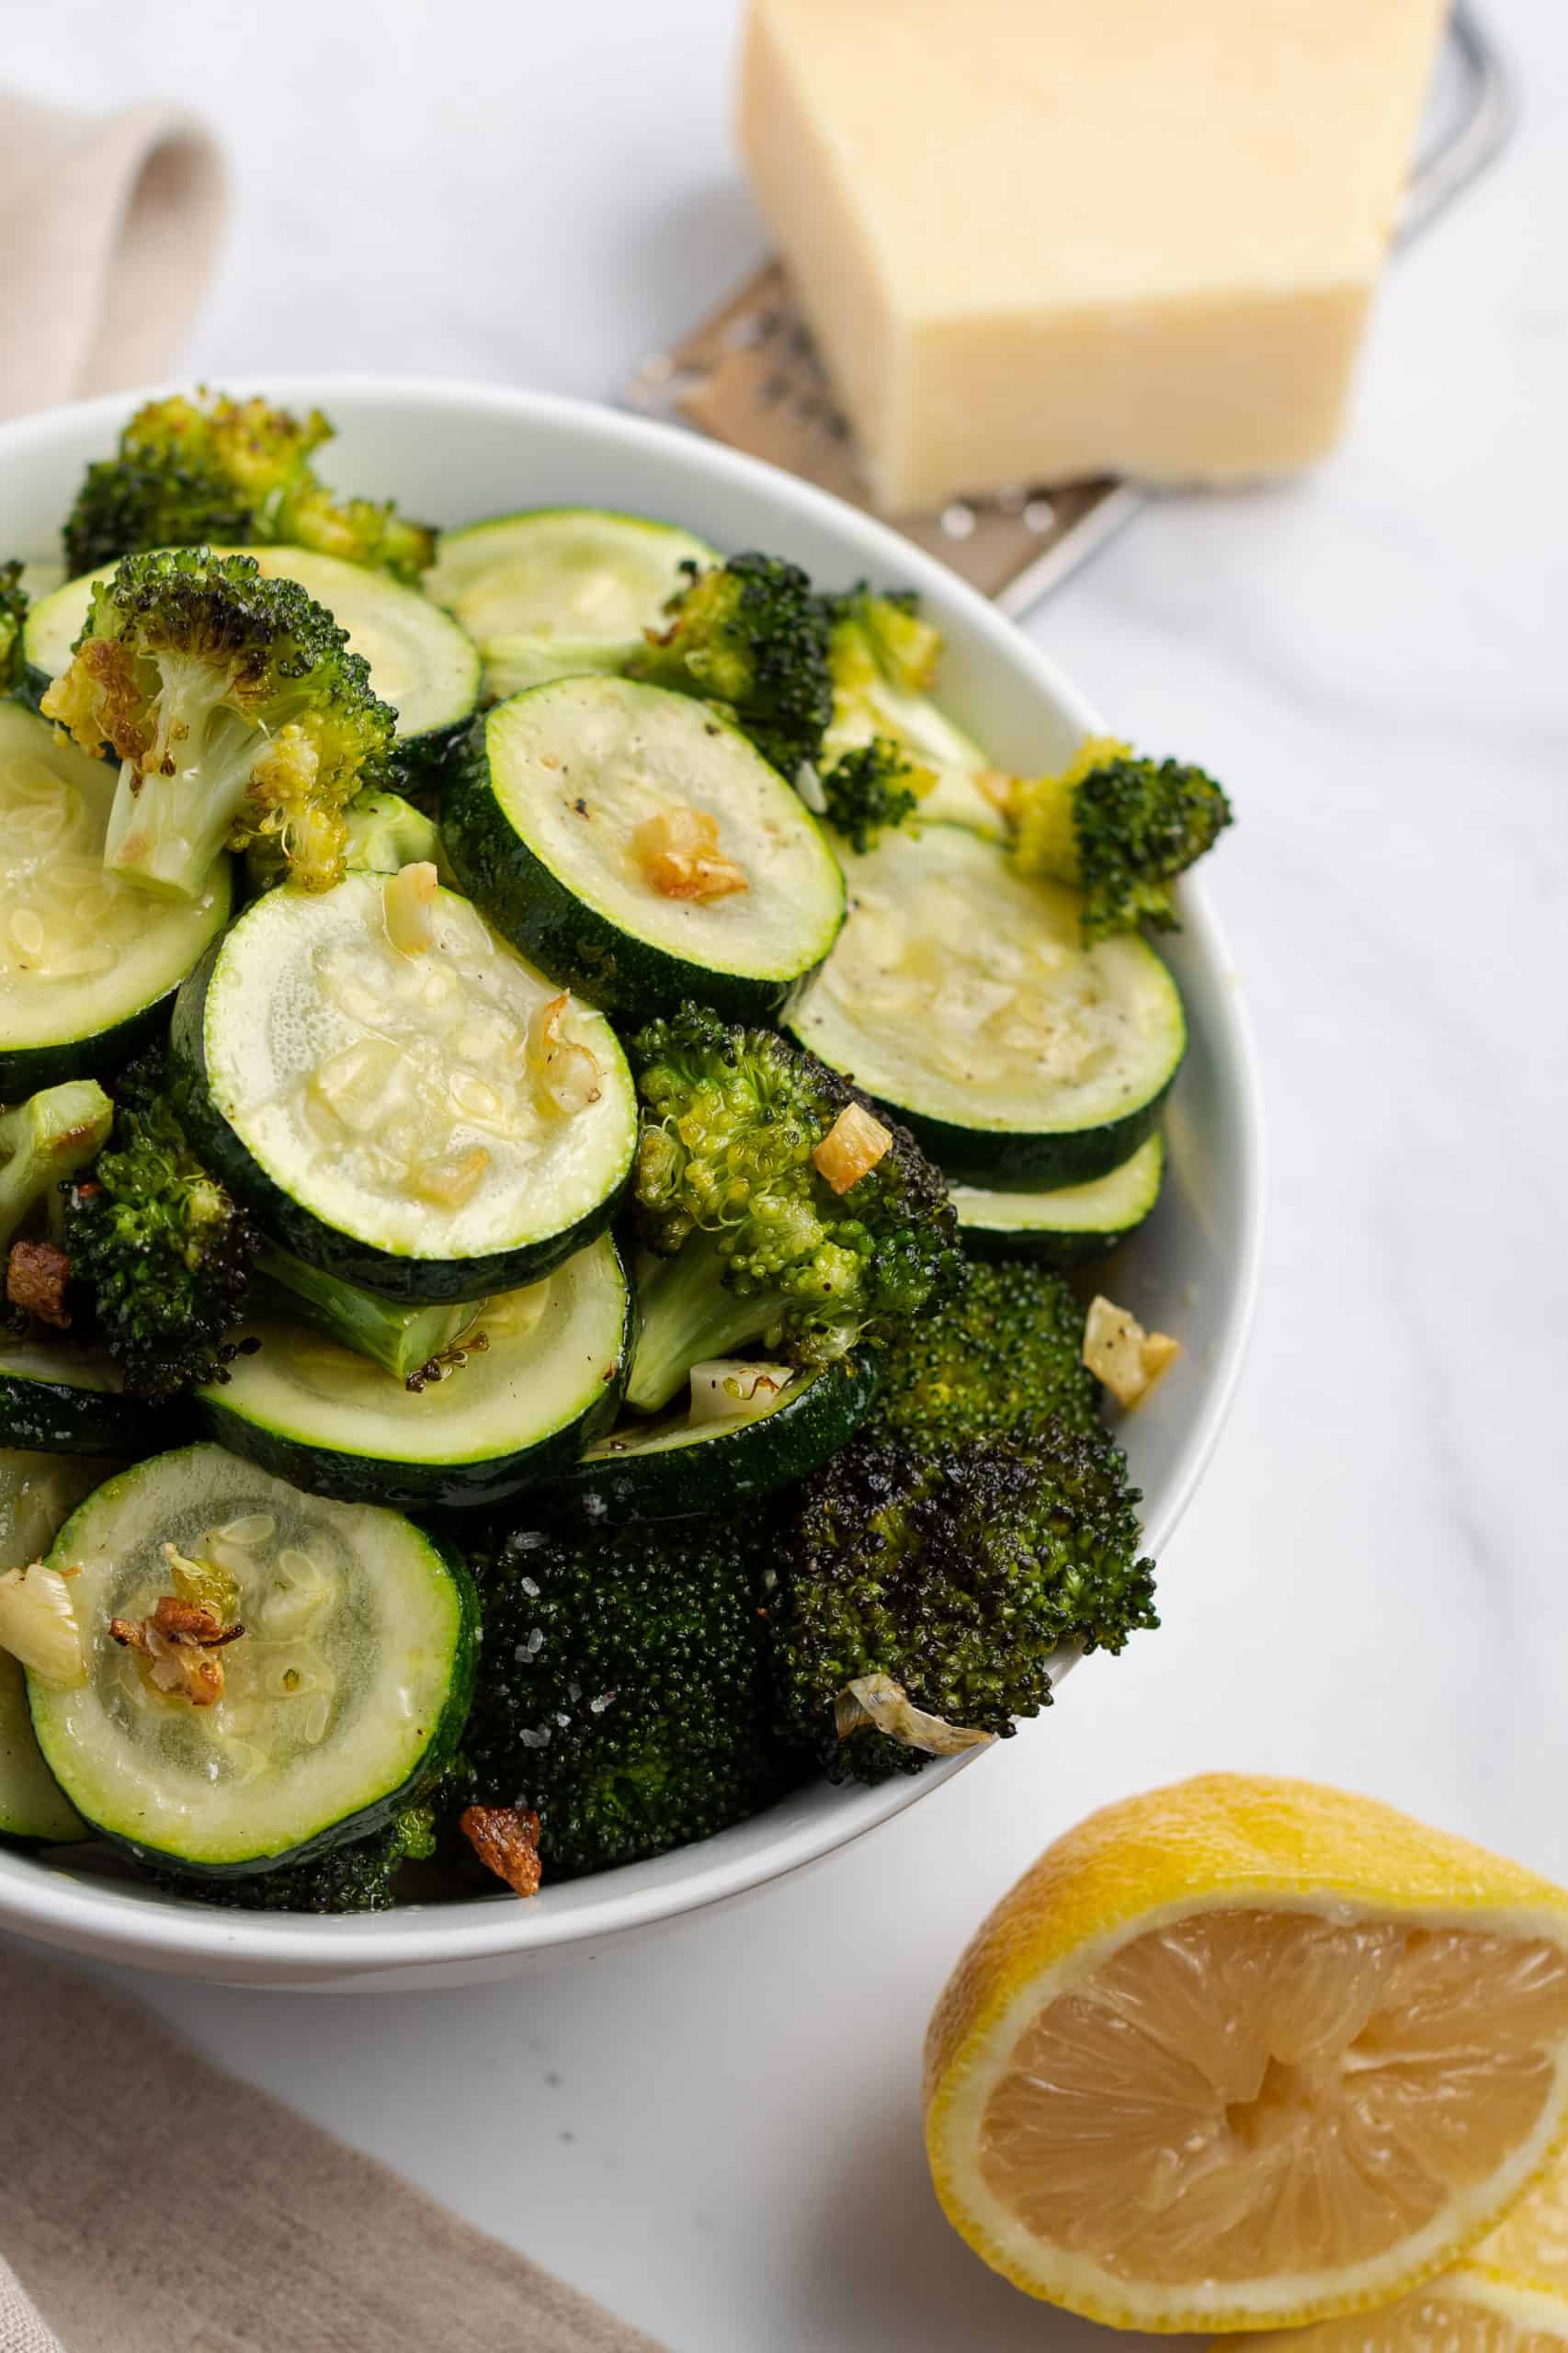 White serving bowl with sliced zucchini and broccoli florets that were roasted and topped with garlic and parmesan cheese.